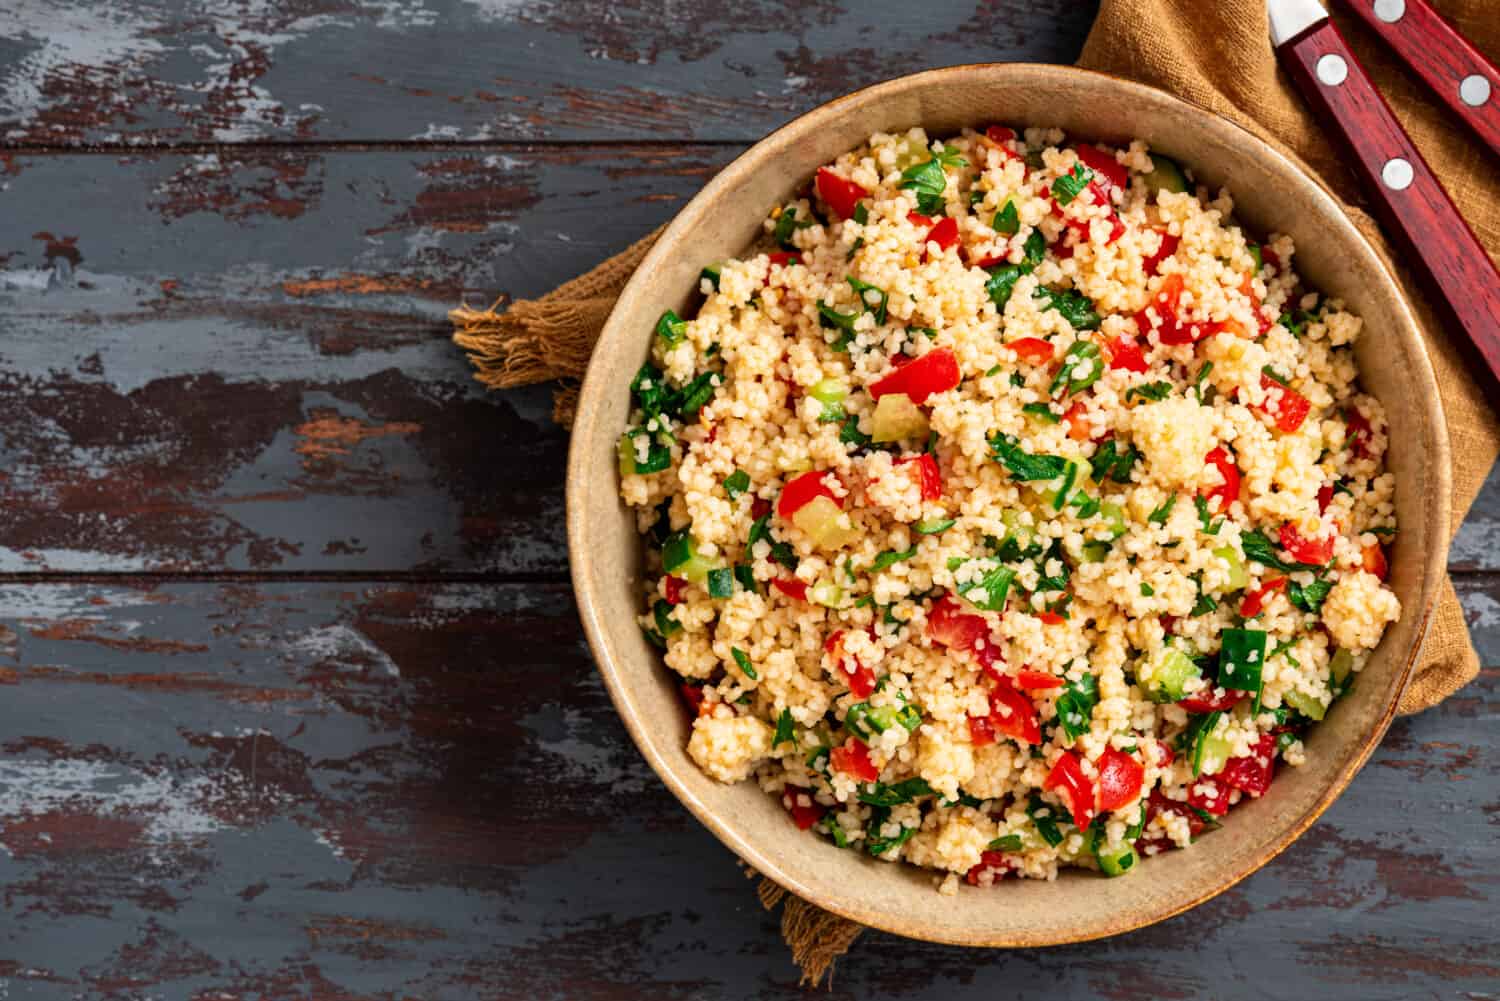 Create a healthy and balanced meal with this couscous vegetable salad.